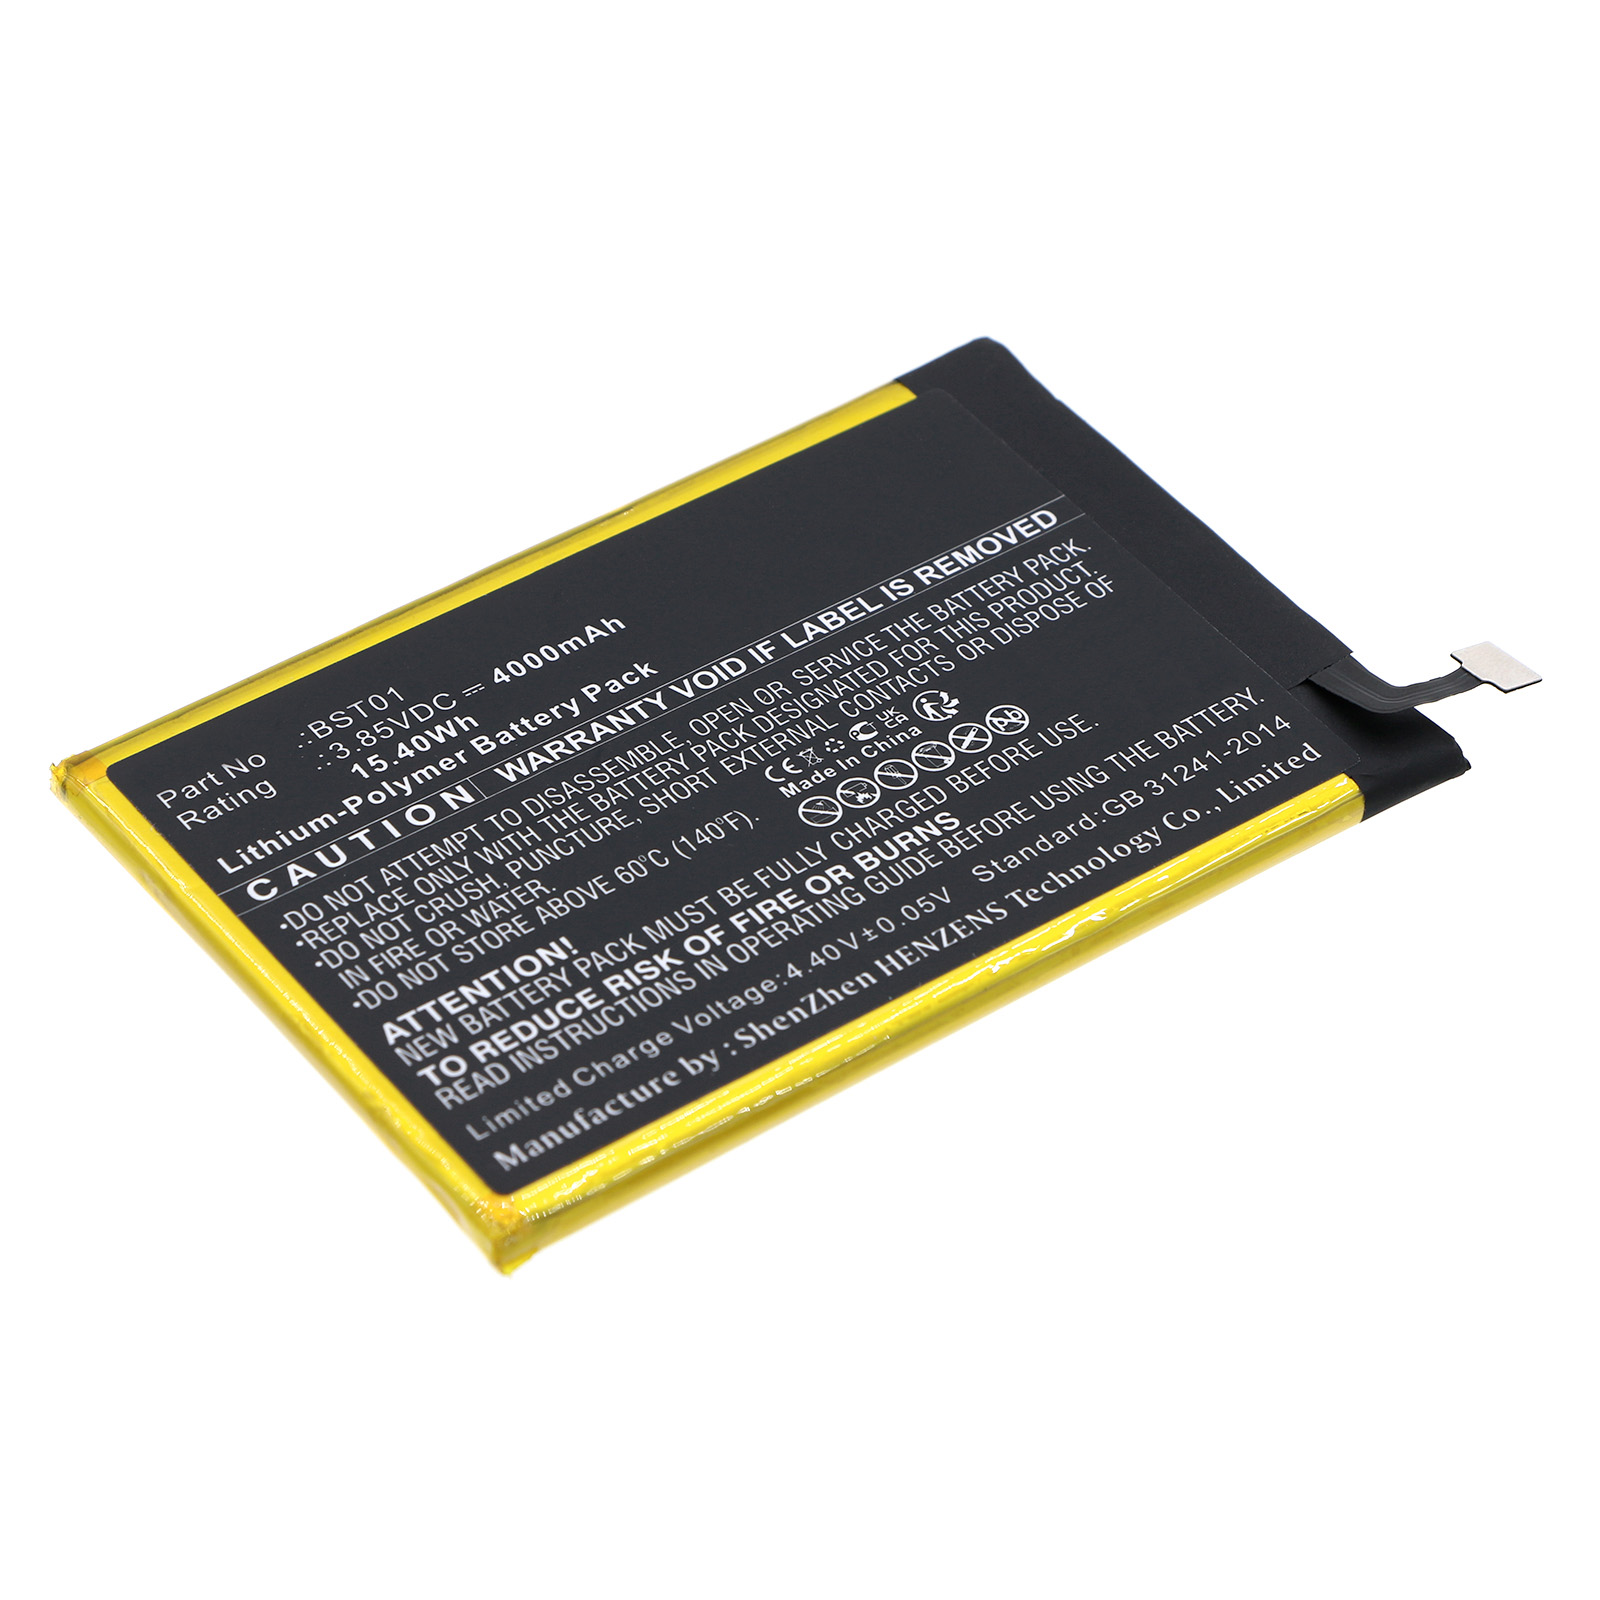 Synergy Digital Cell Phone Battery, Compatible with HTC BST01 Cell Phone Battery (Li-Pol, 3.85V, 4000mAh)